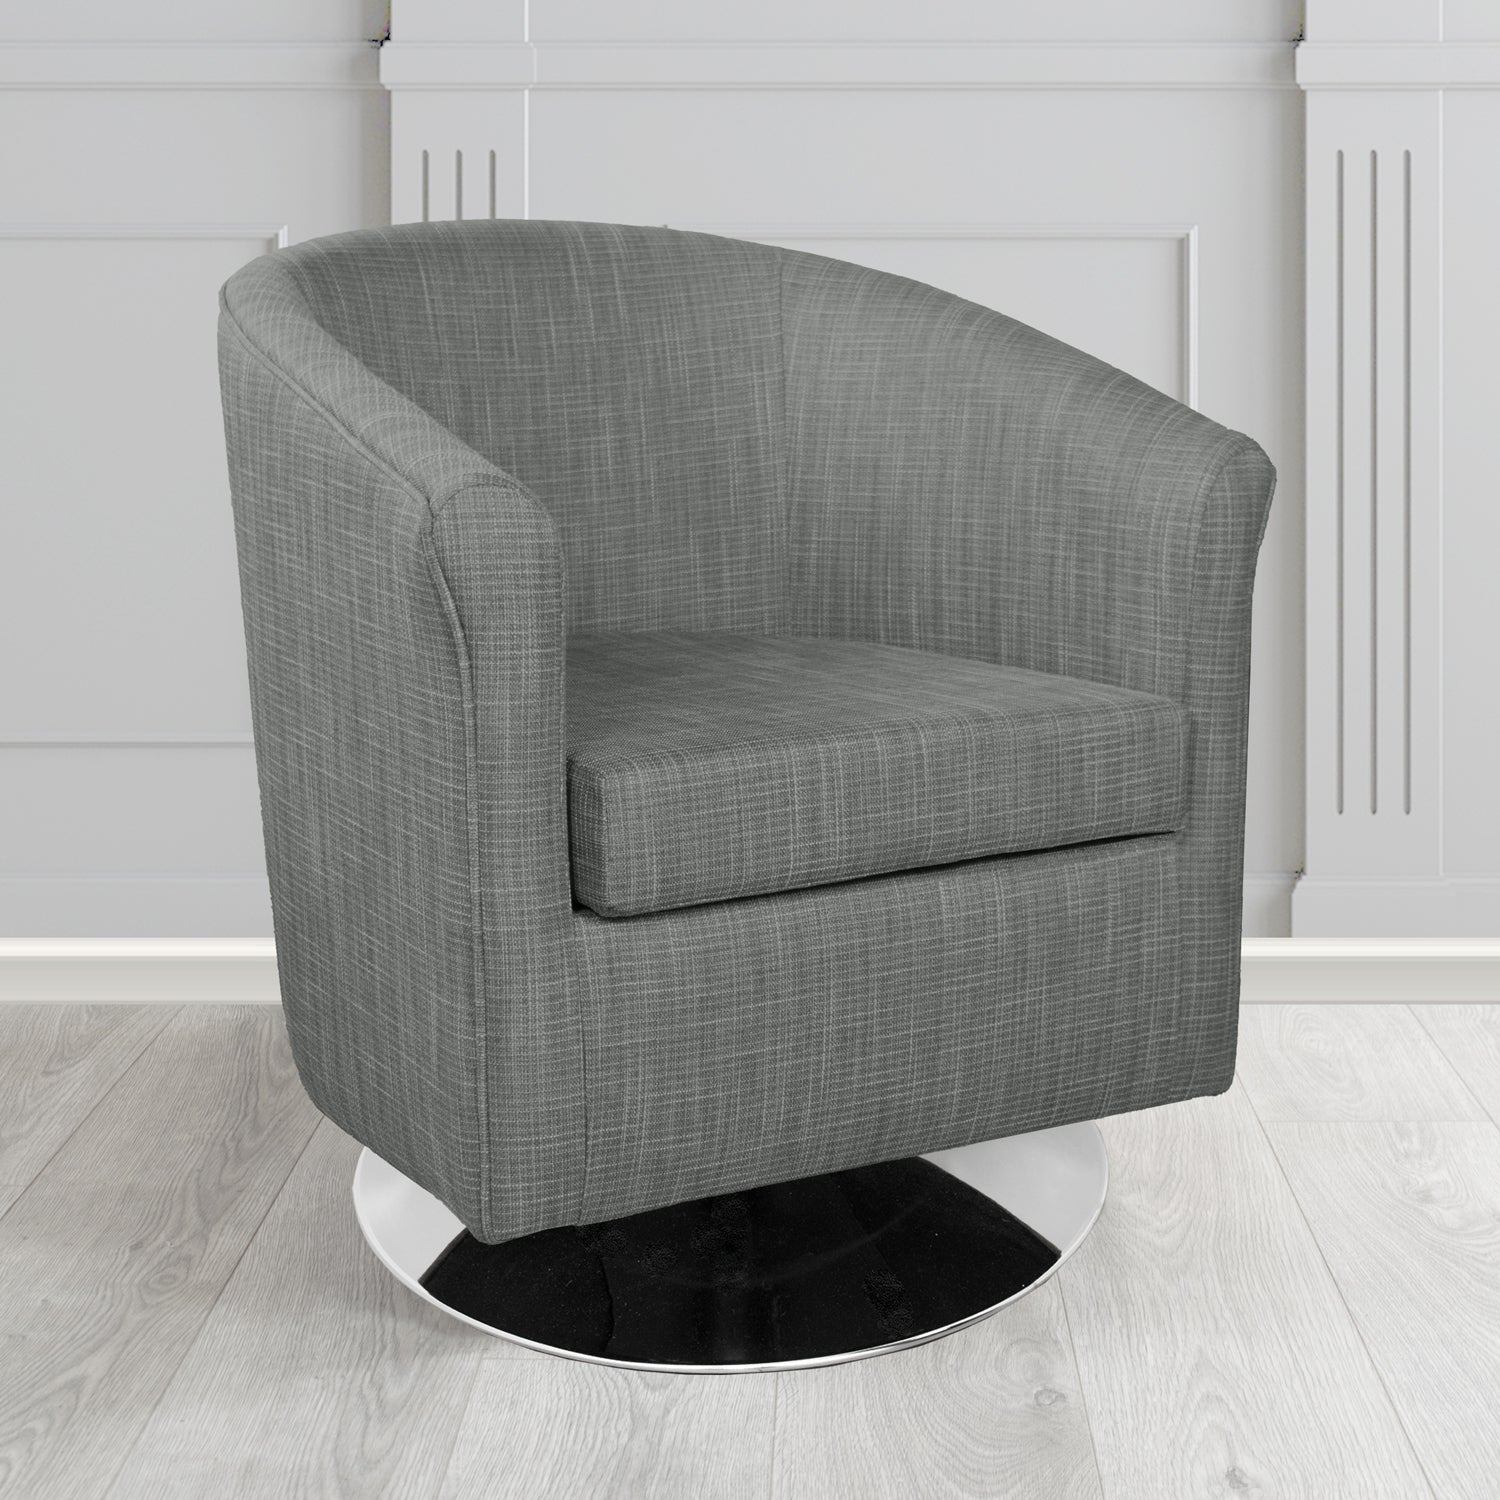 Tuscany Ravel Zinc Contract Crib 5 Fabric Swivel Tub Chair - Antimicrobial & Water-Resistant - The Tub Chair Shop